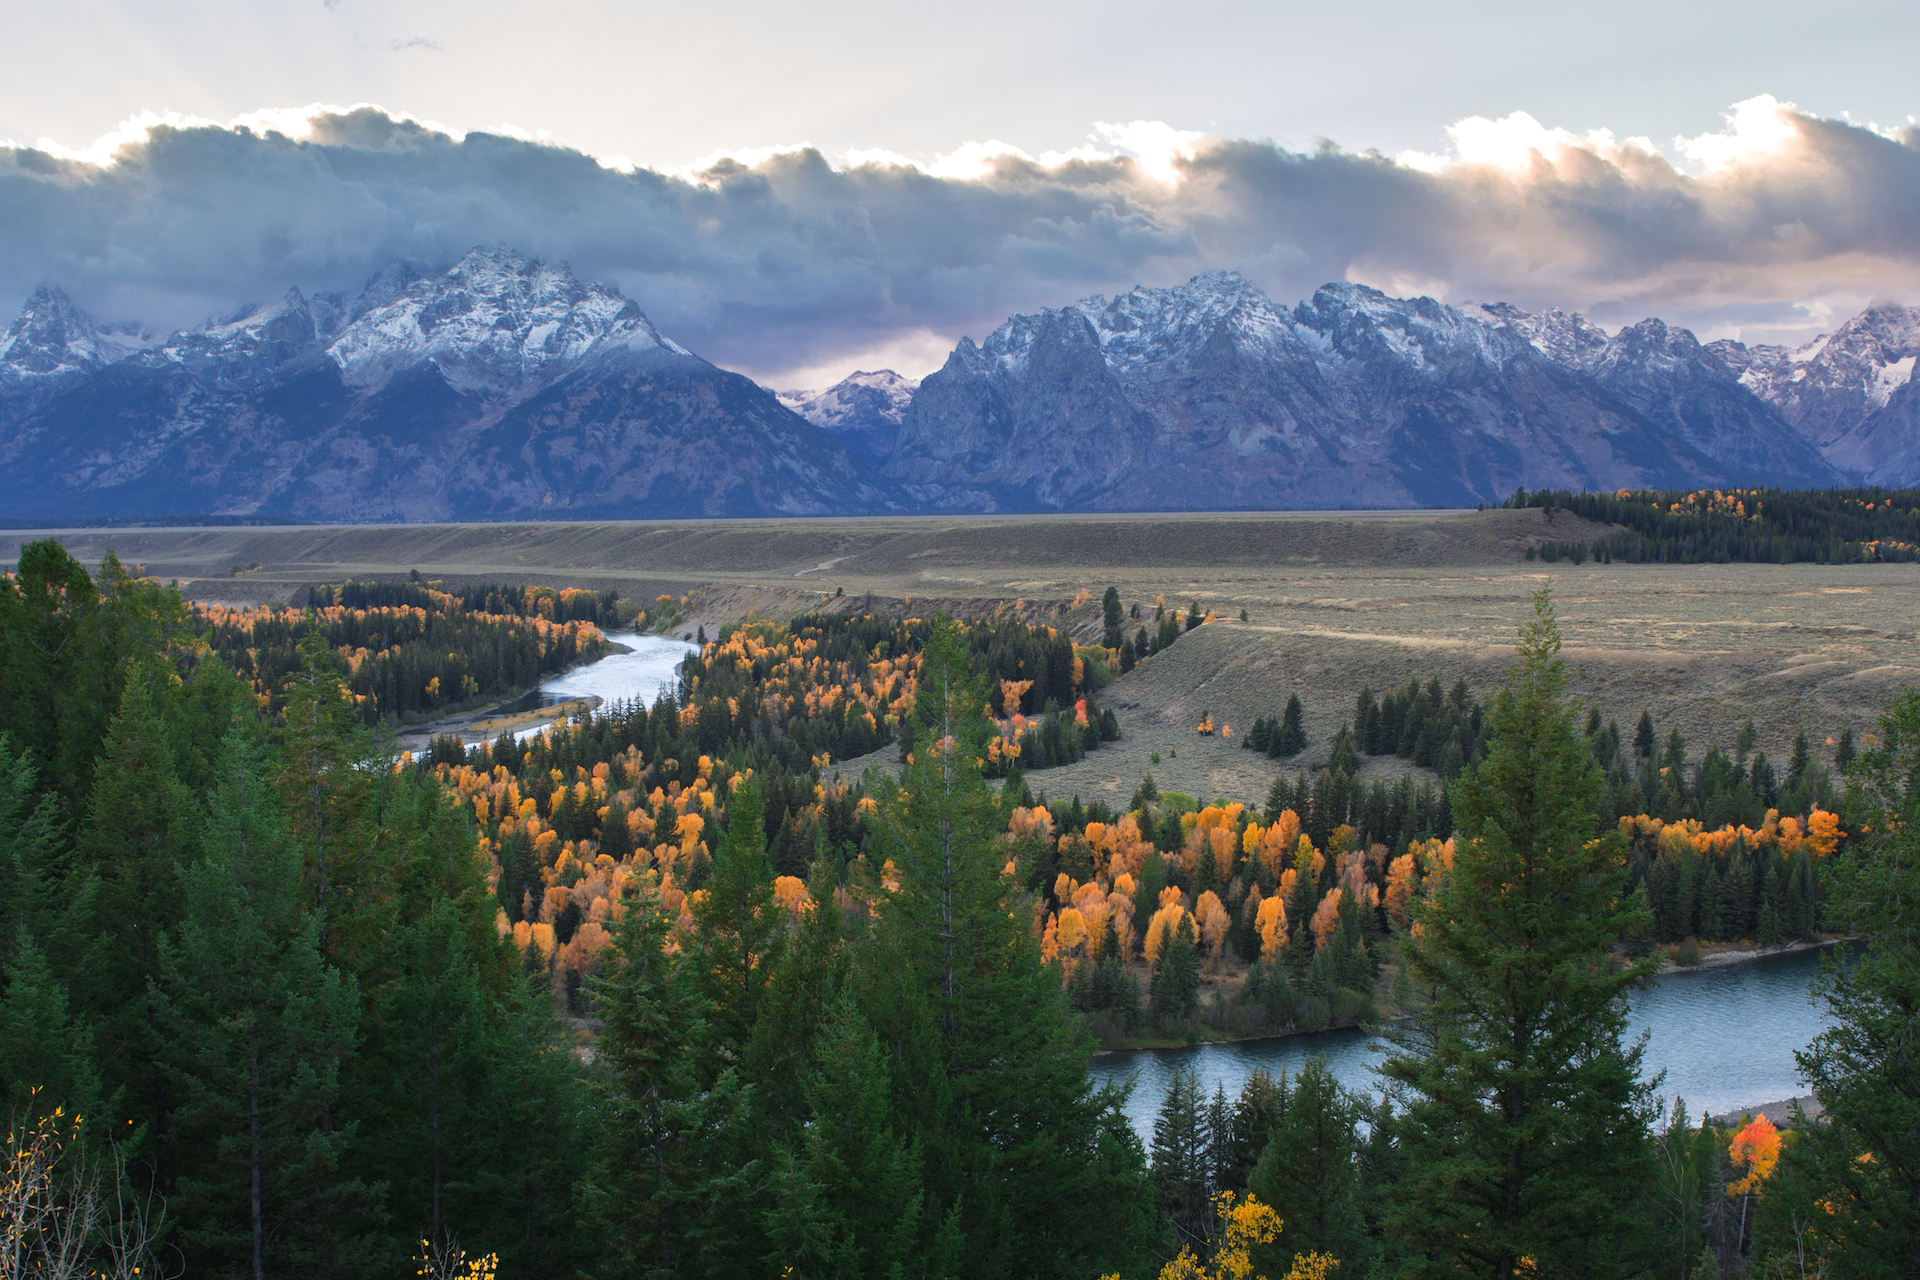 View of Grand Teton mountain range and a valley of trees with autumn foliage along a river